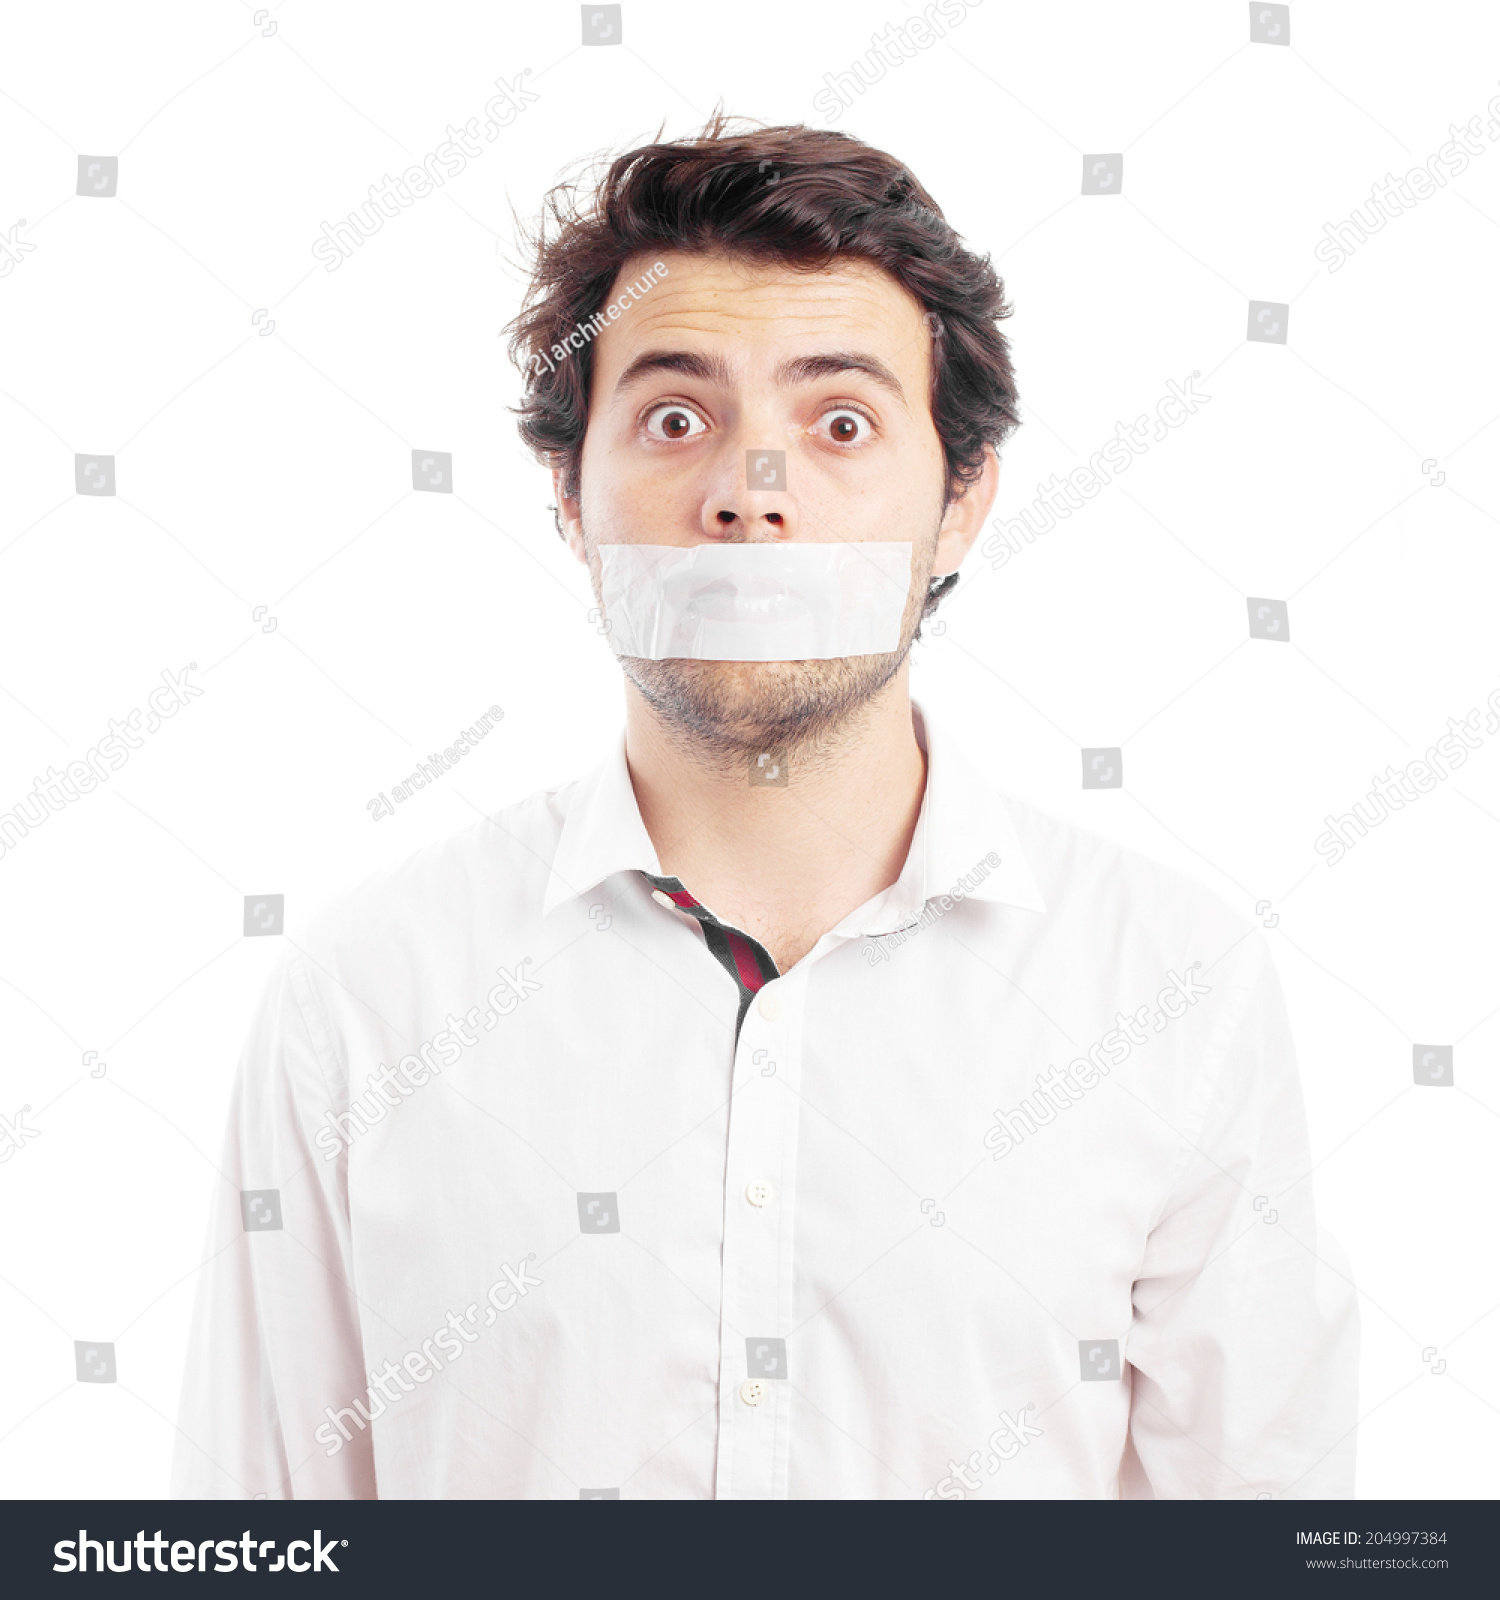 Young Man Silenced By Tape Stock Photo 204997384 : Shutterstock